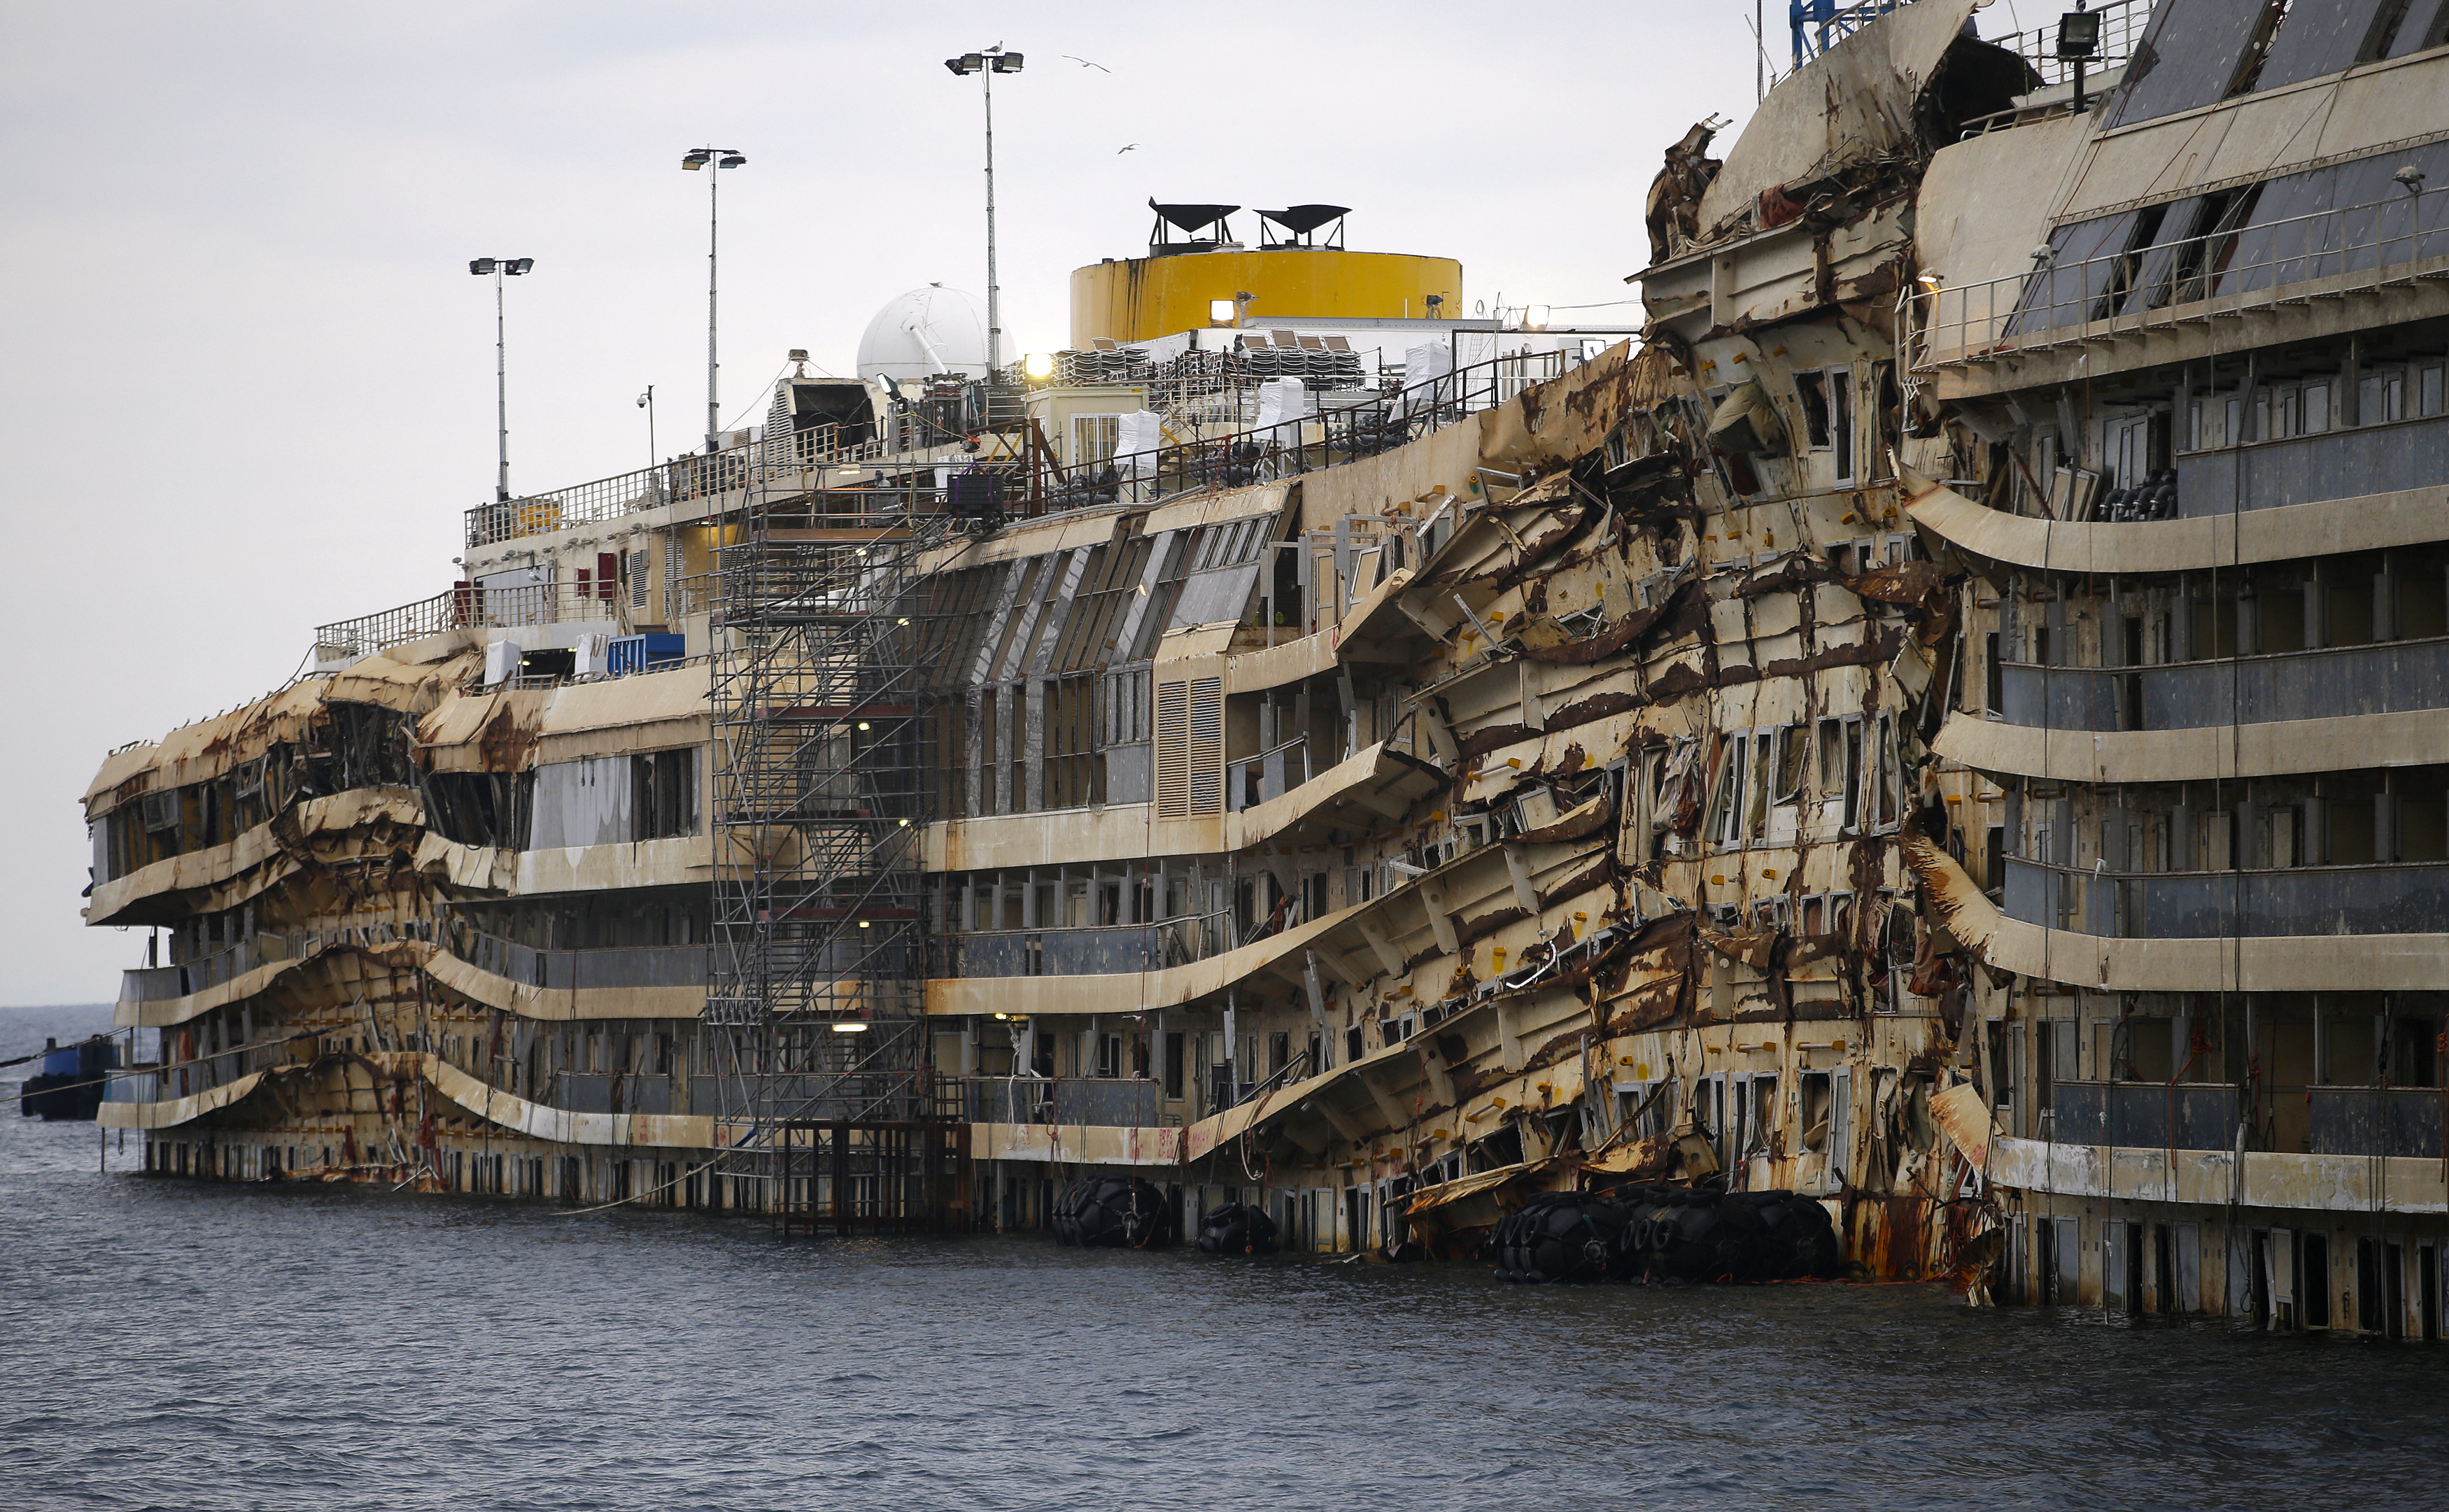 The cruise liner Costa Concordia is seen during the 